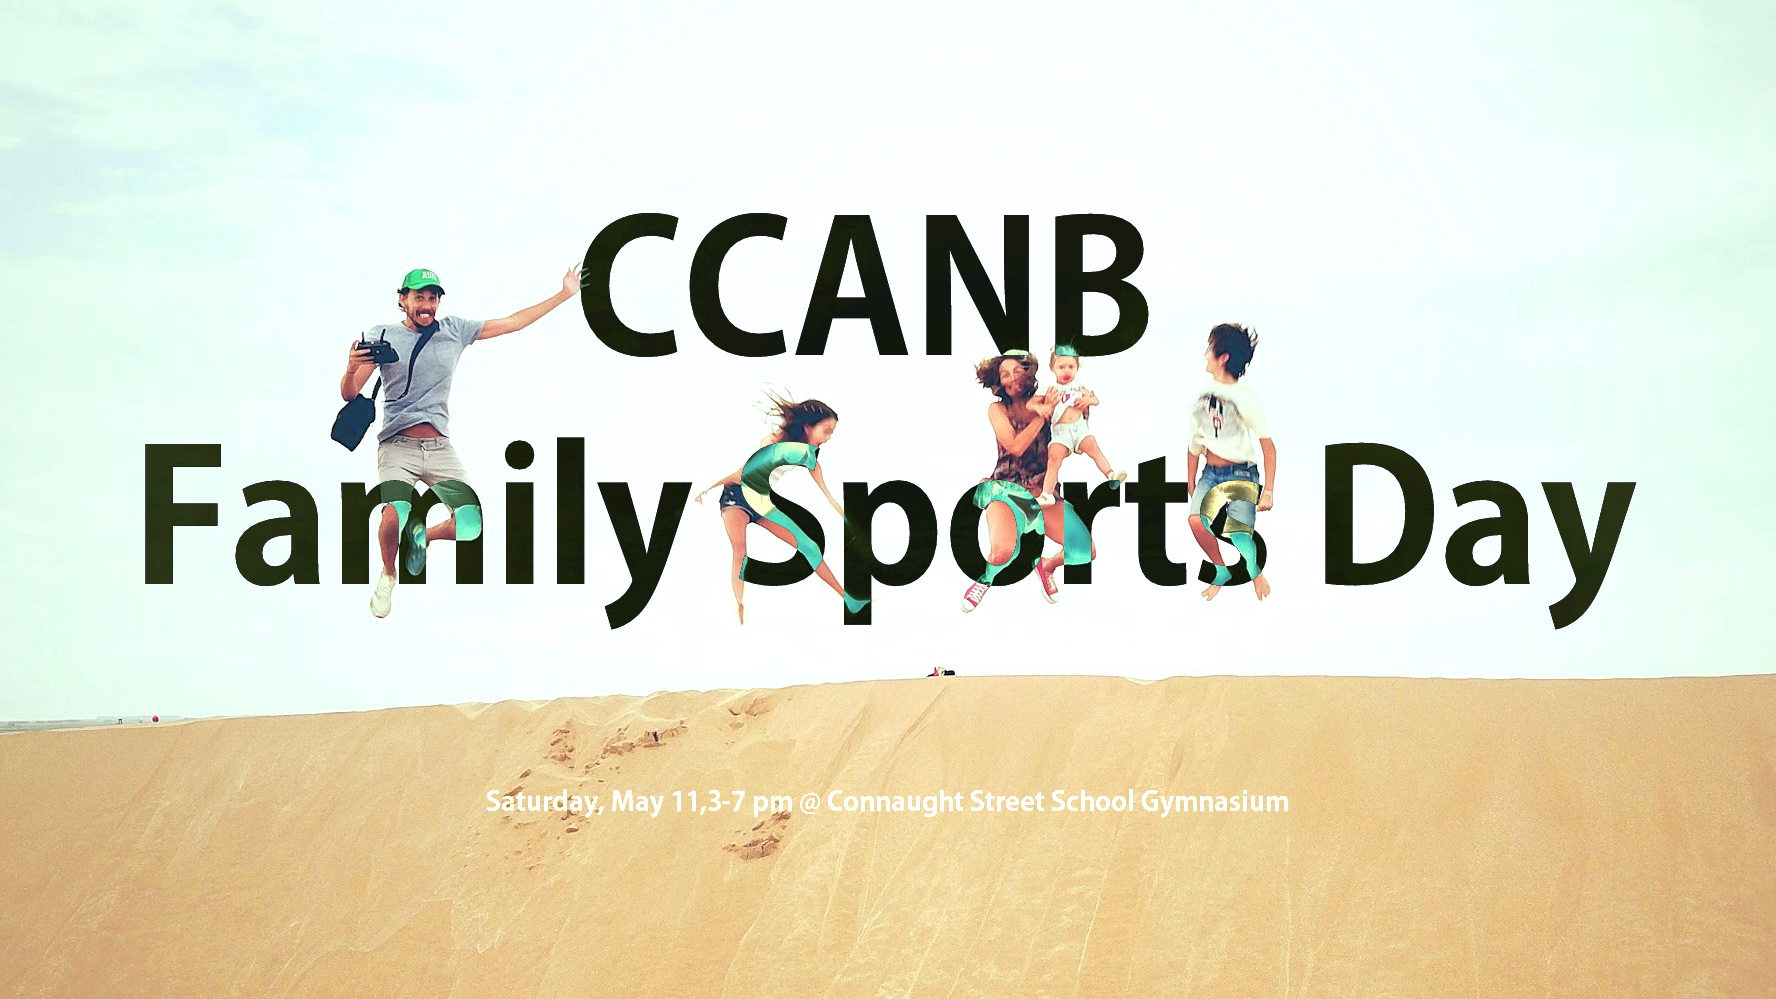 /article/posts/get-ready-for-a-thrilling-ccanb-family-sports-day